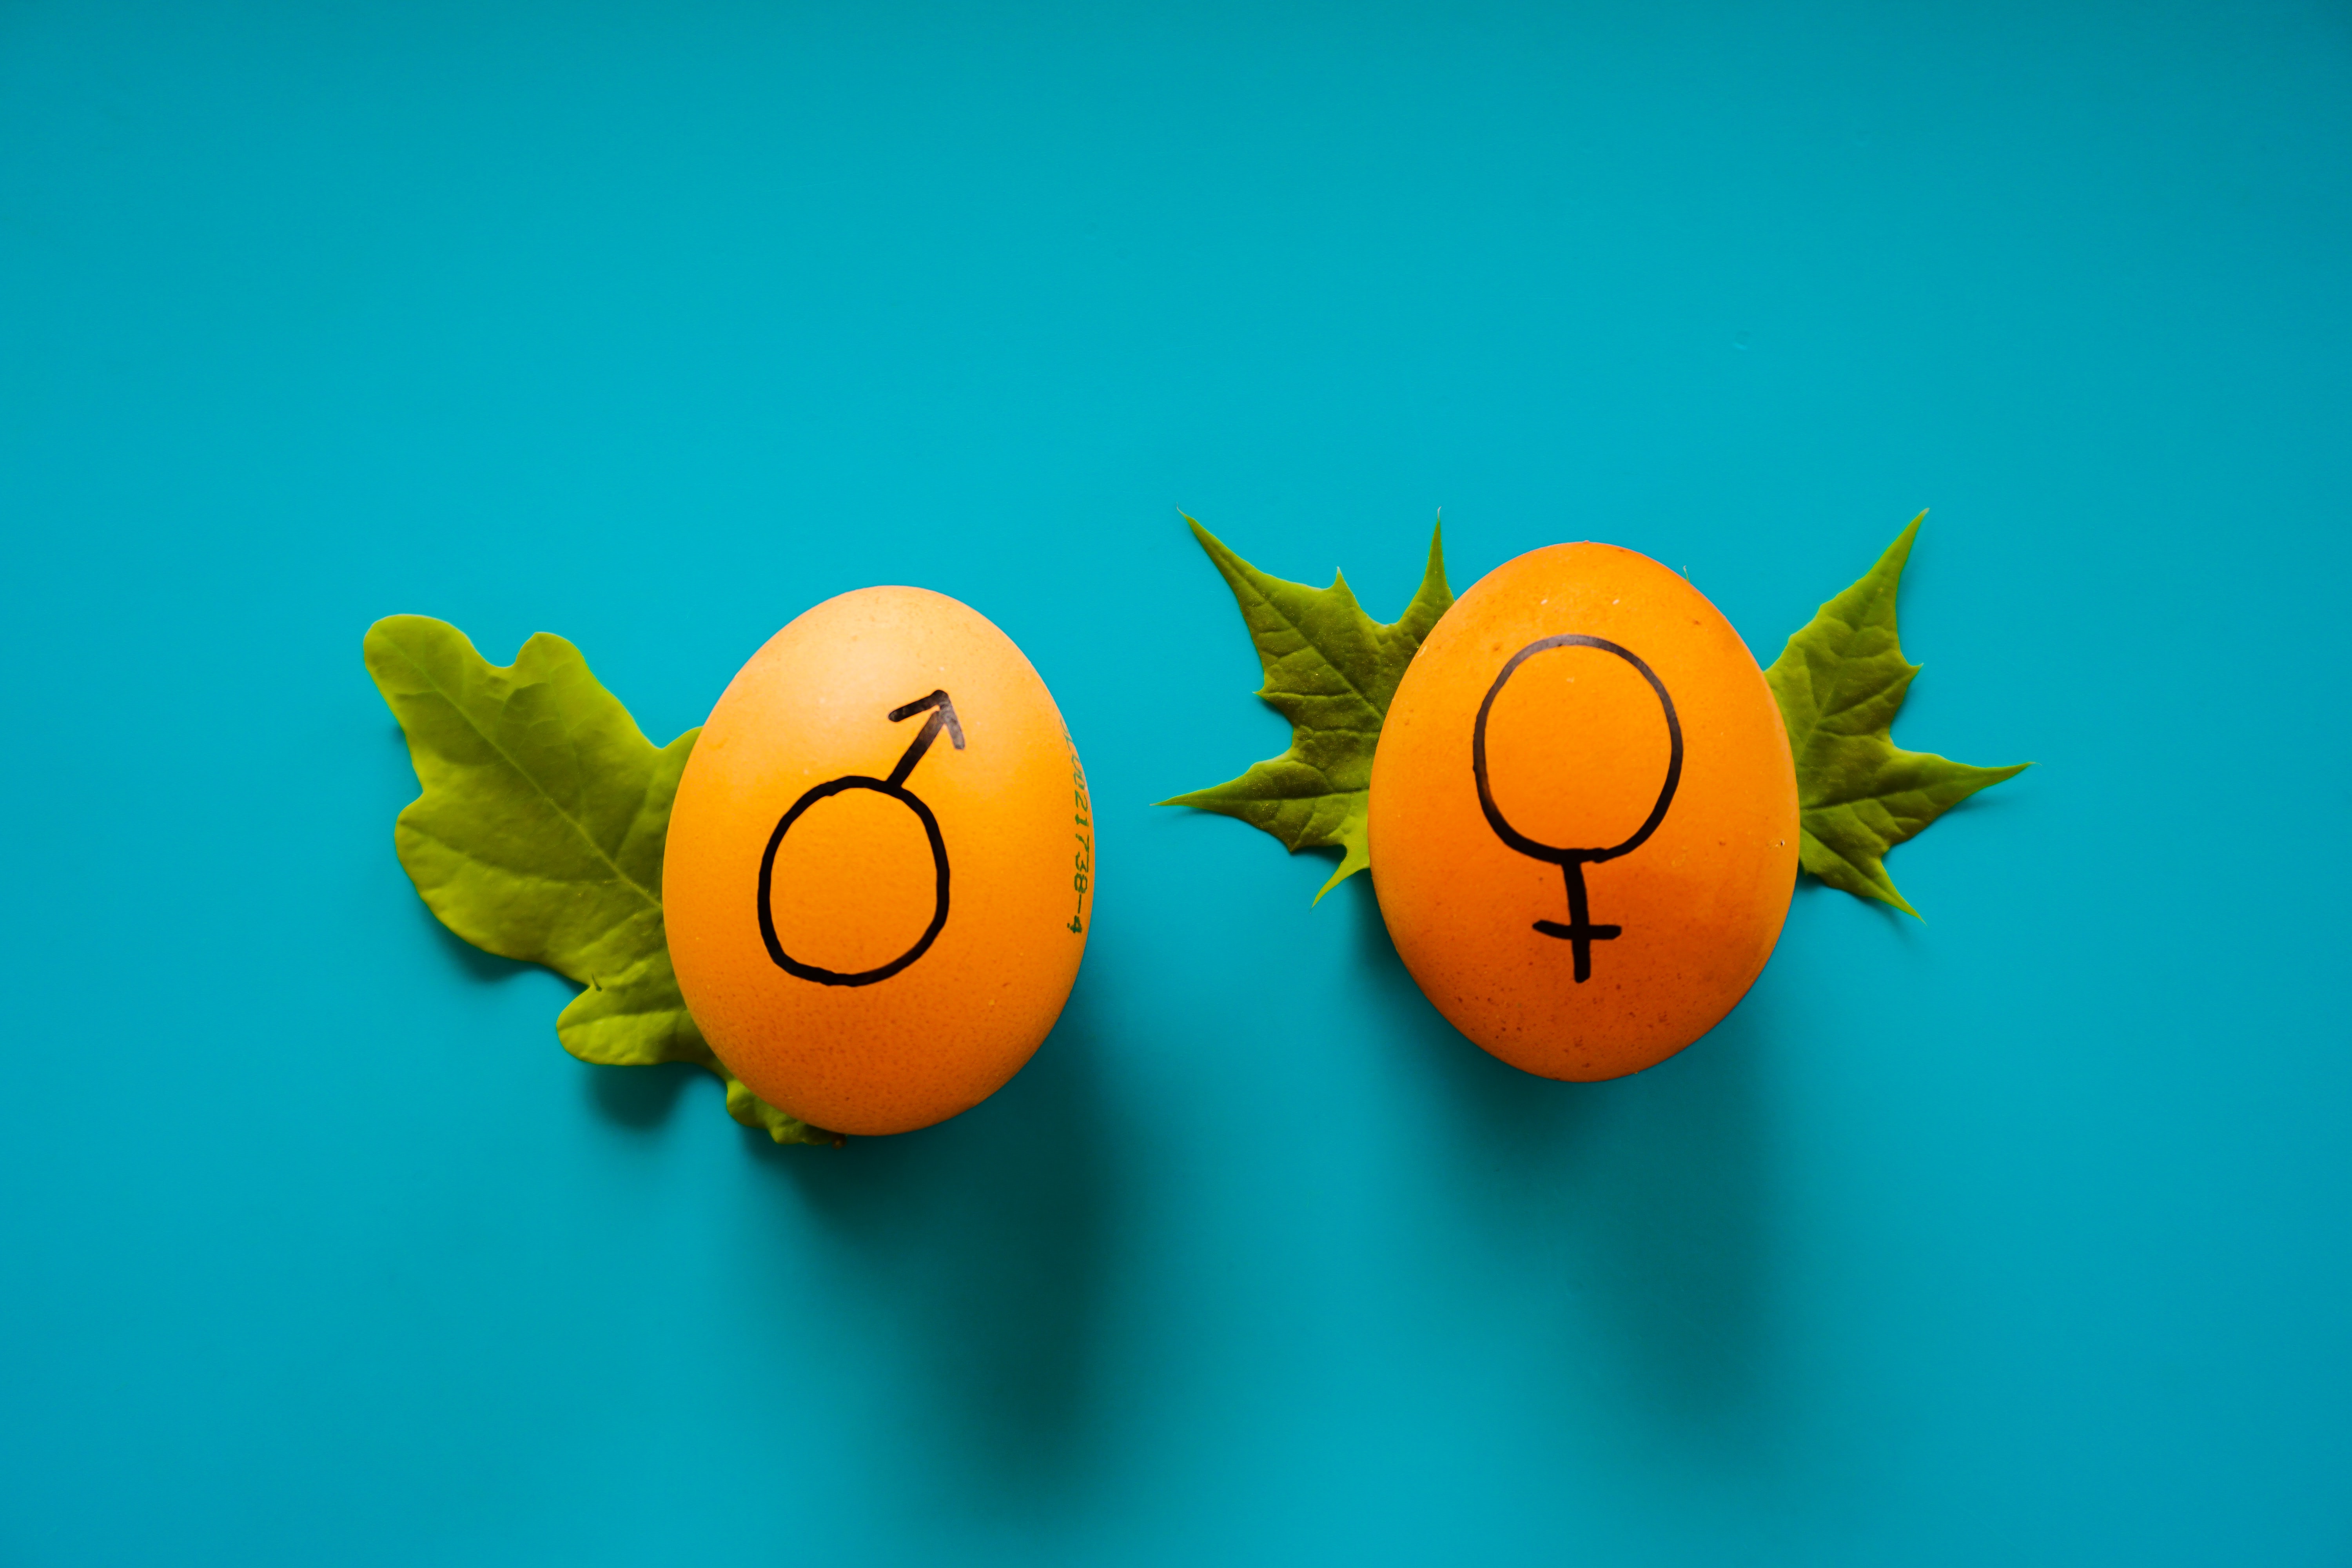 Two eggs representing male and female gender in a cute way